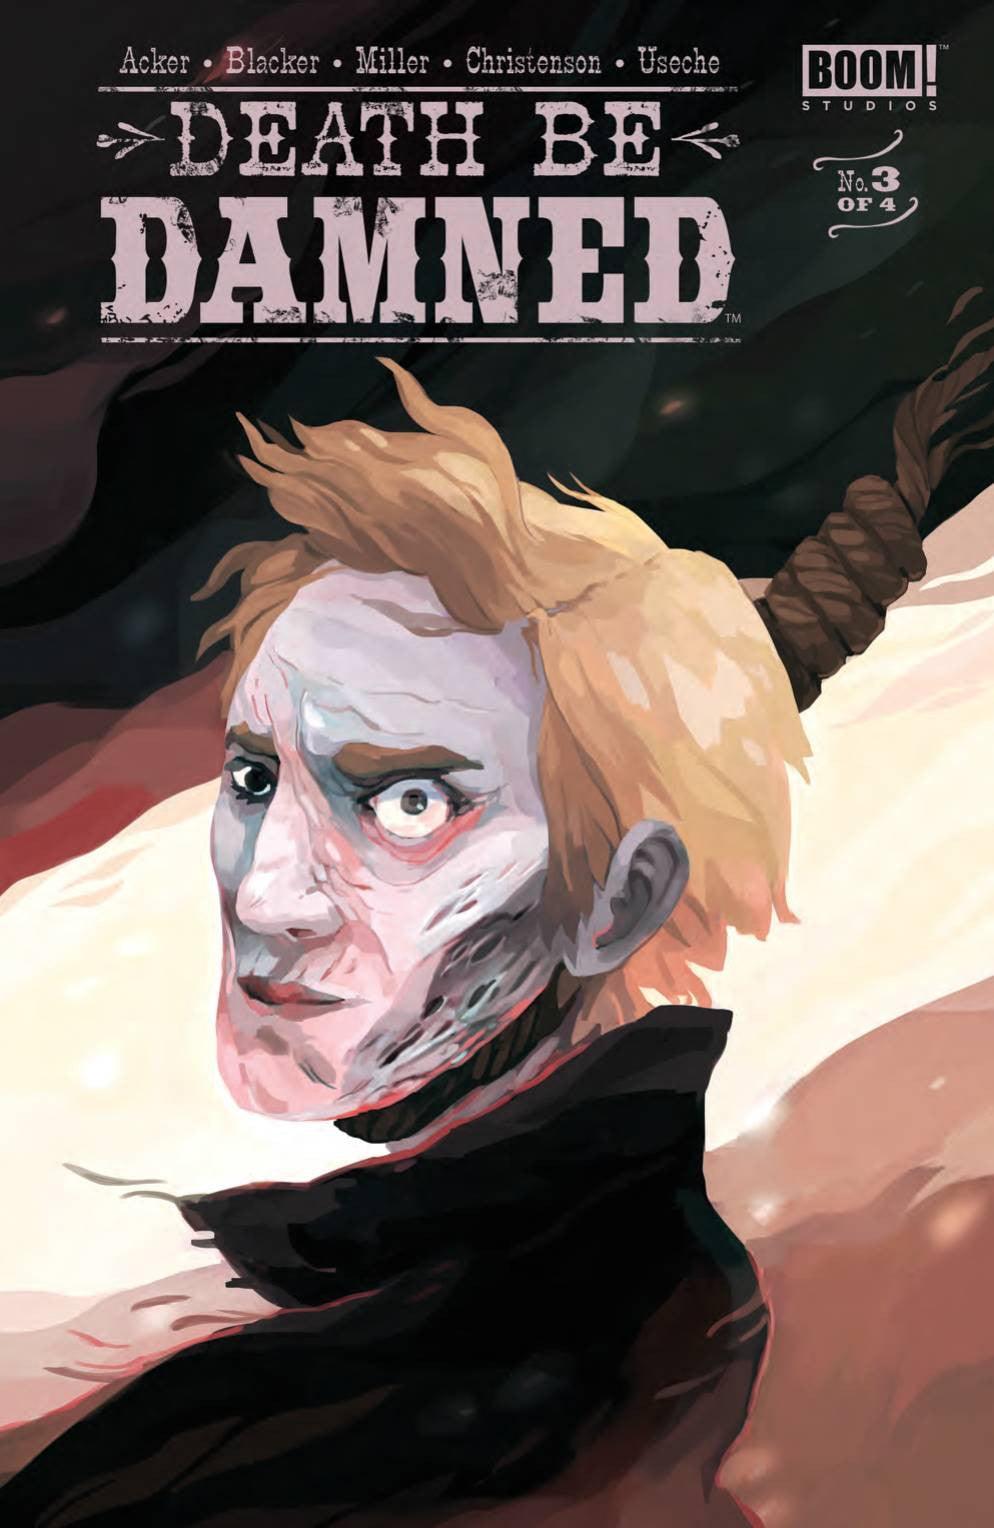 DEATH BE DAMNED #3 - Kings Comics